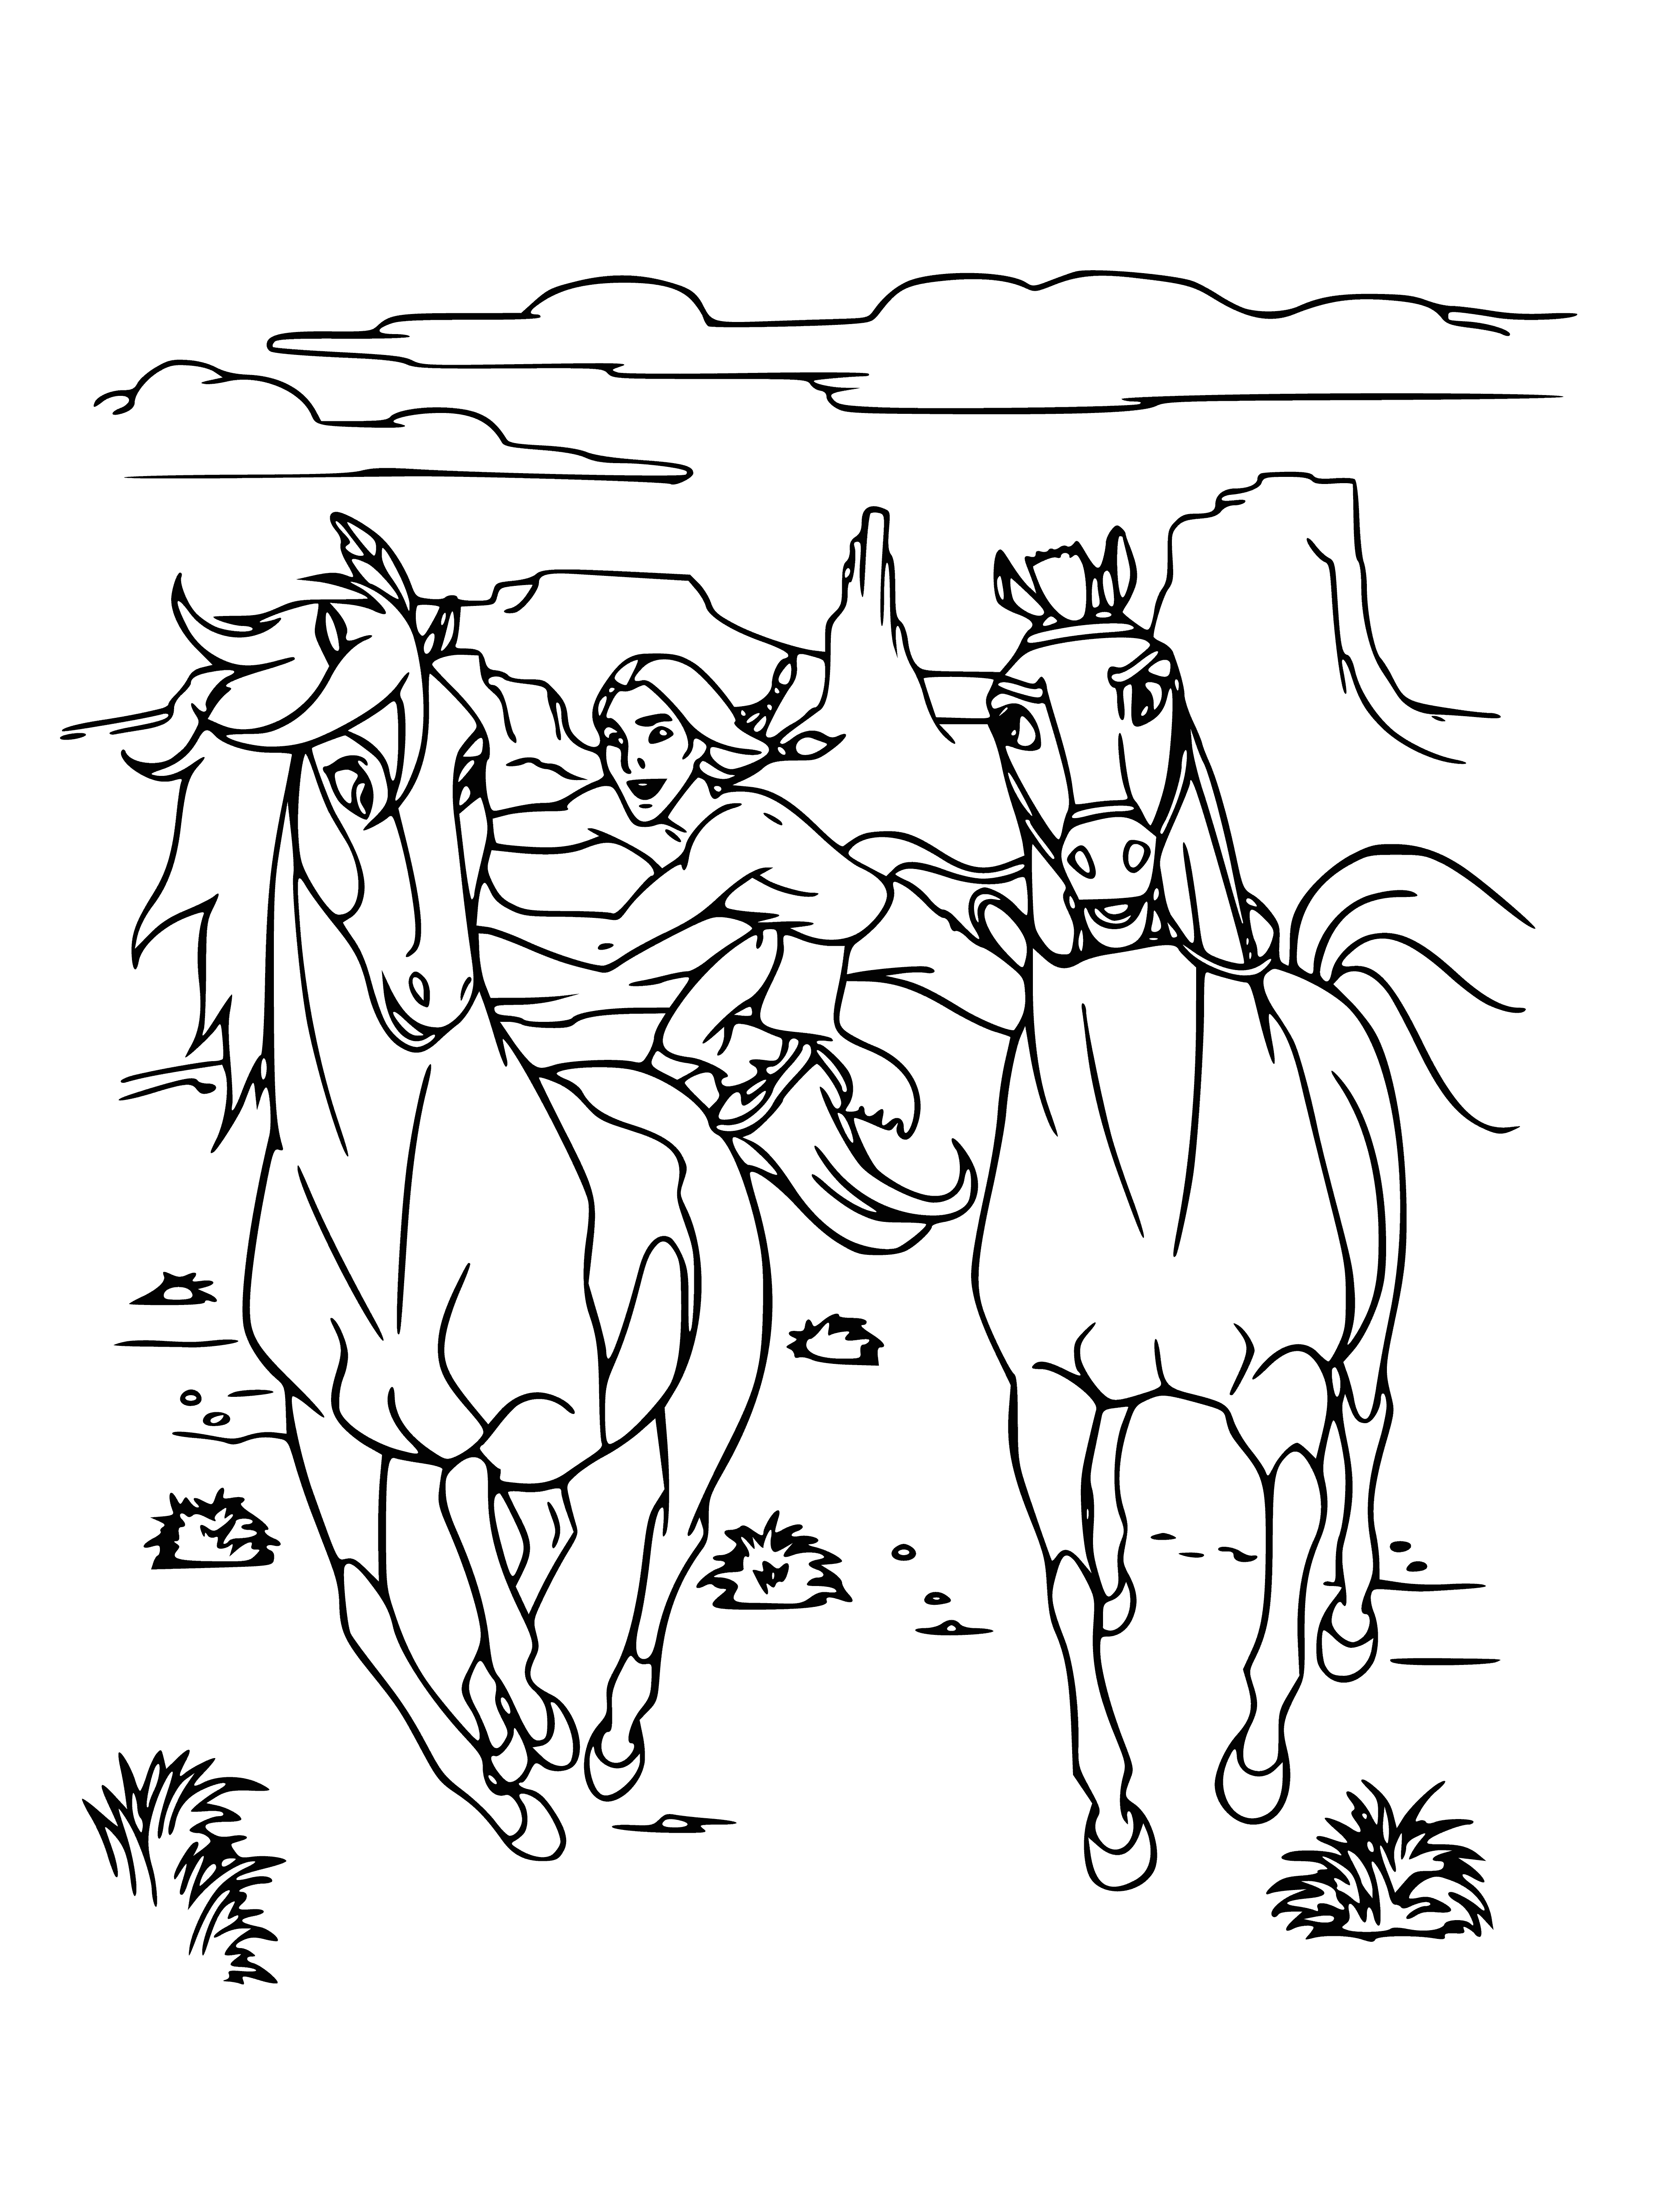 coloring page: Rain and Spirit, a white horse and black man, stand together in a river, the man's hand against the horse's neck and the horse's head bowed. Both gaze upward to the sky.